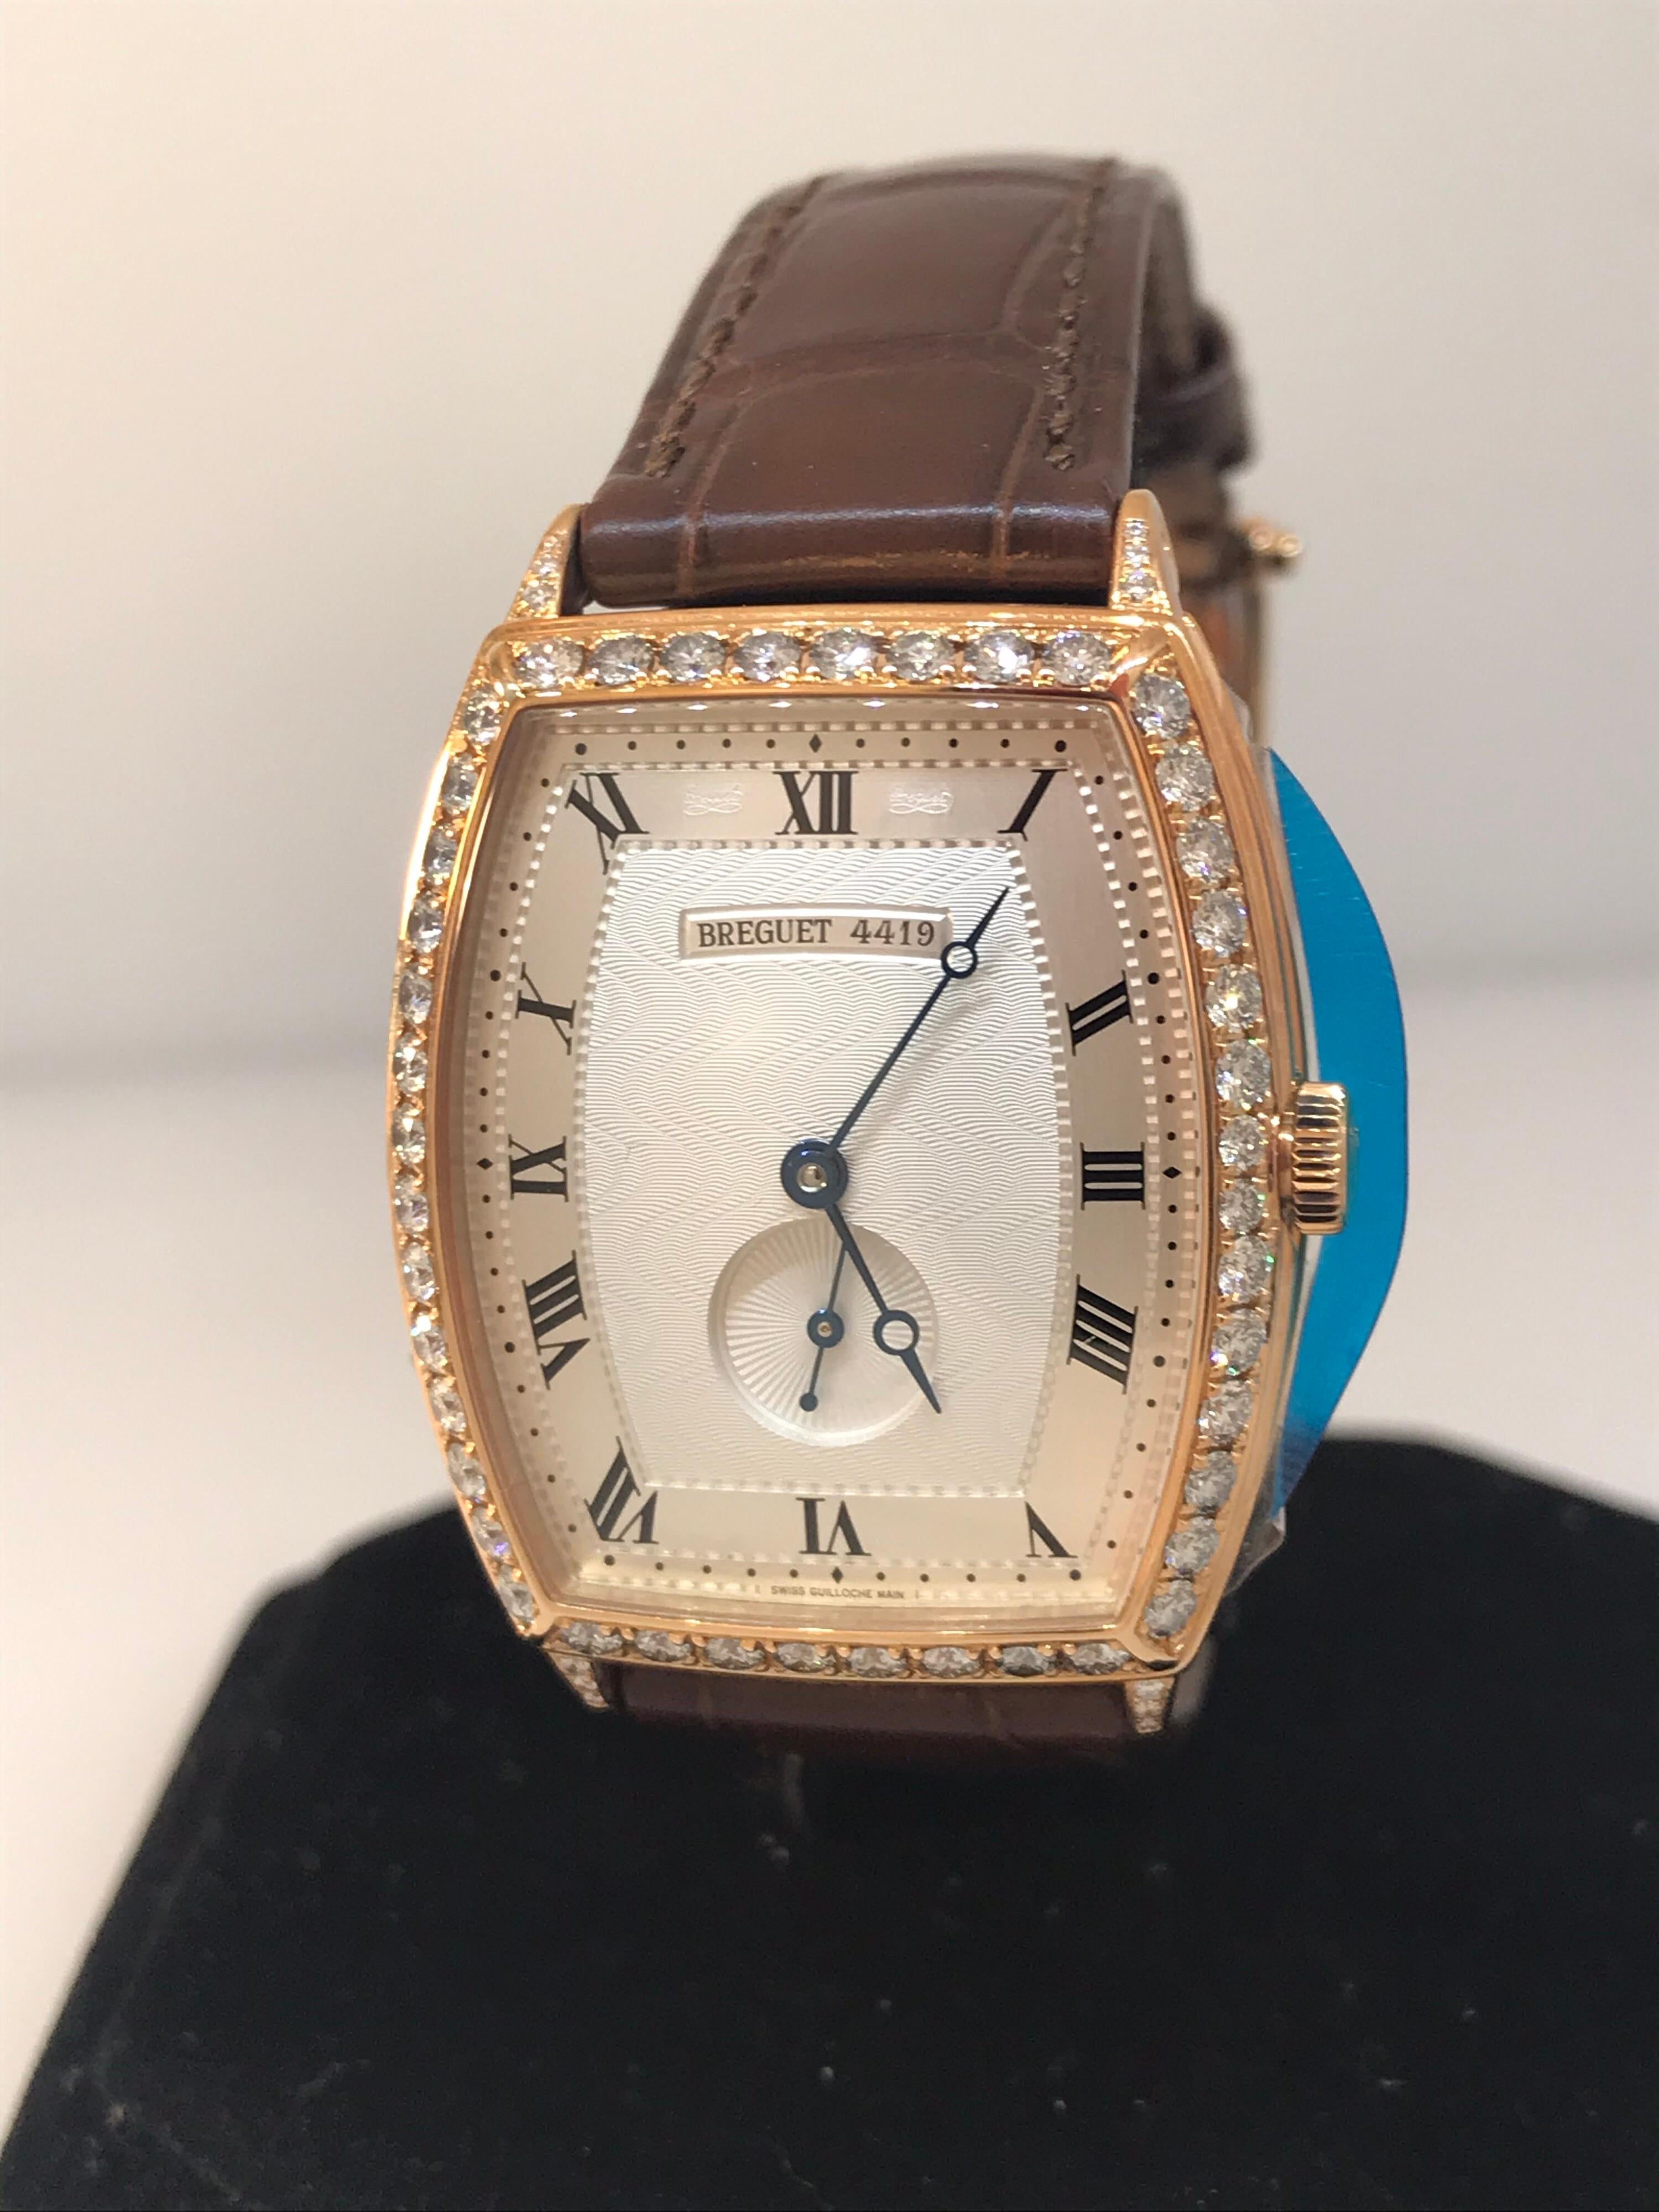 Breguet Heritage Men's Watch

Model Number: 3661BR12984DD00

100% Authentic

Brand New

Comes with original Breguet Box & Papers

18 Karat Rose Gold

Diamond Bezel (56 Diamonds 1.869 Carats)

Silver Dial

Roman Numeral Hour Markers

Case Dimensions: